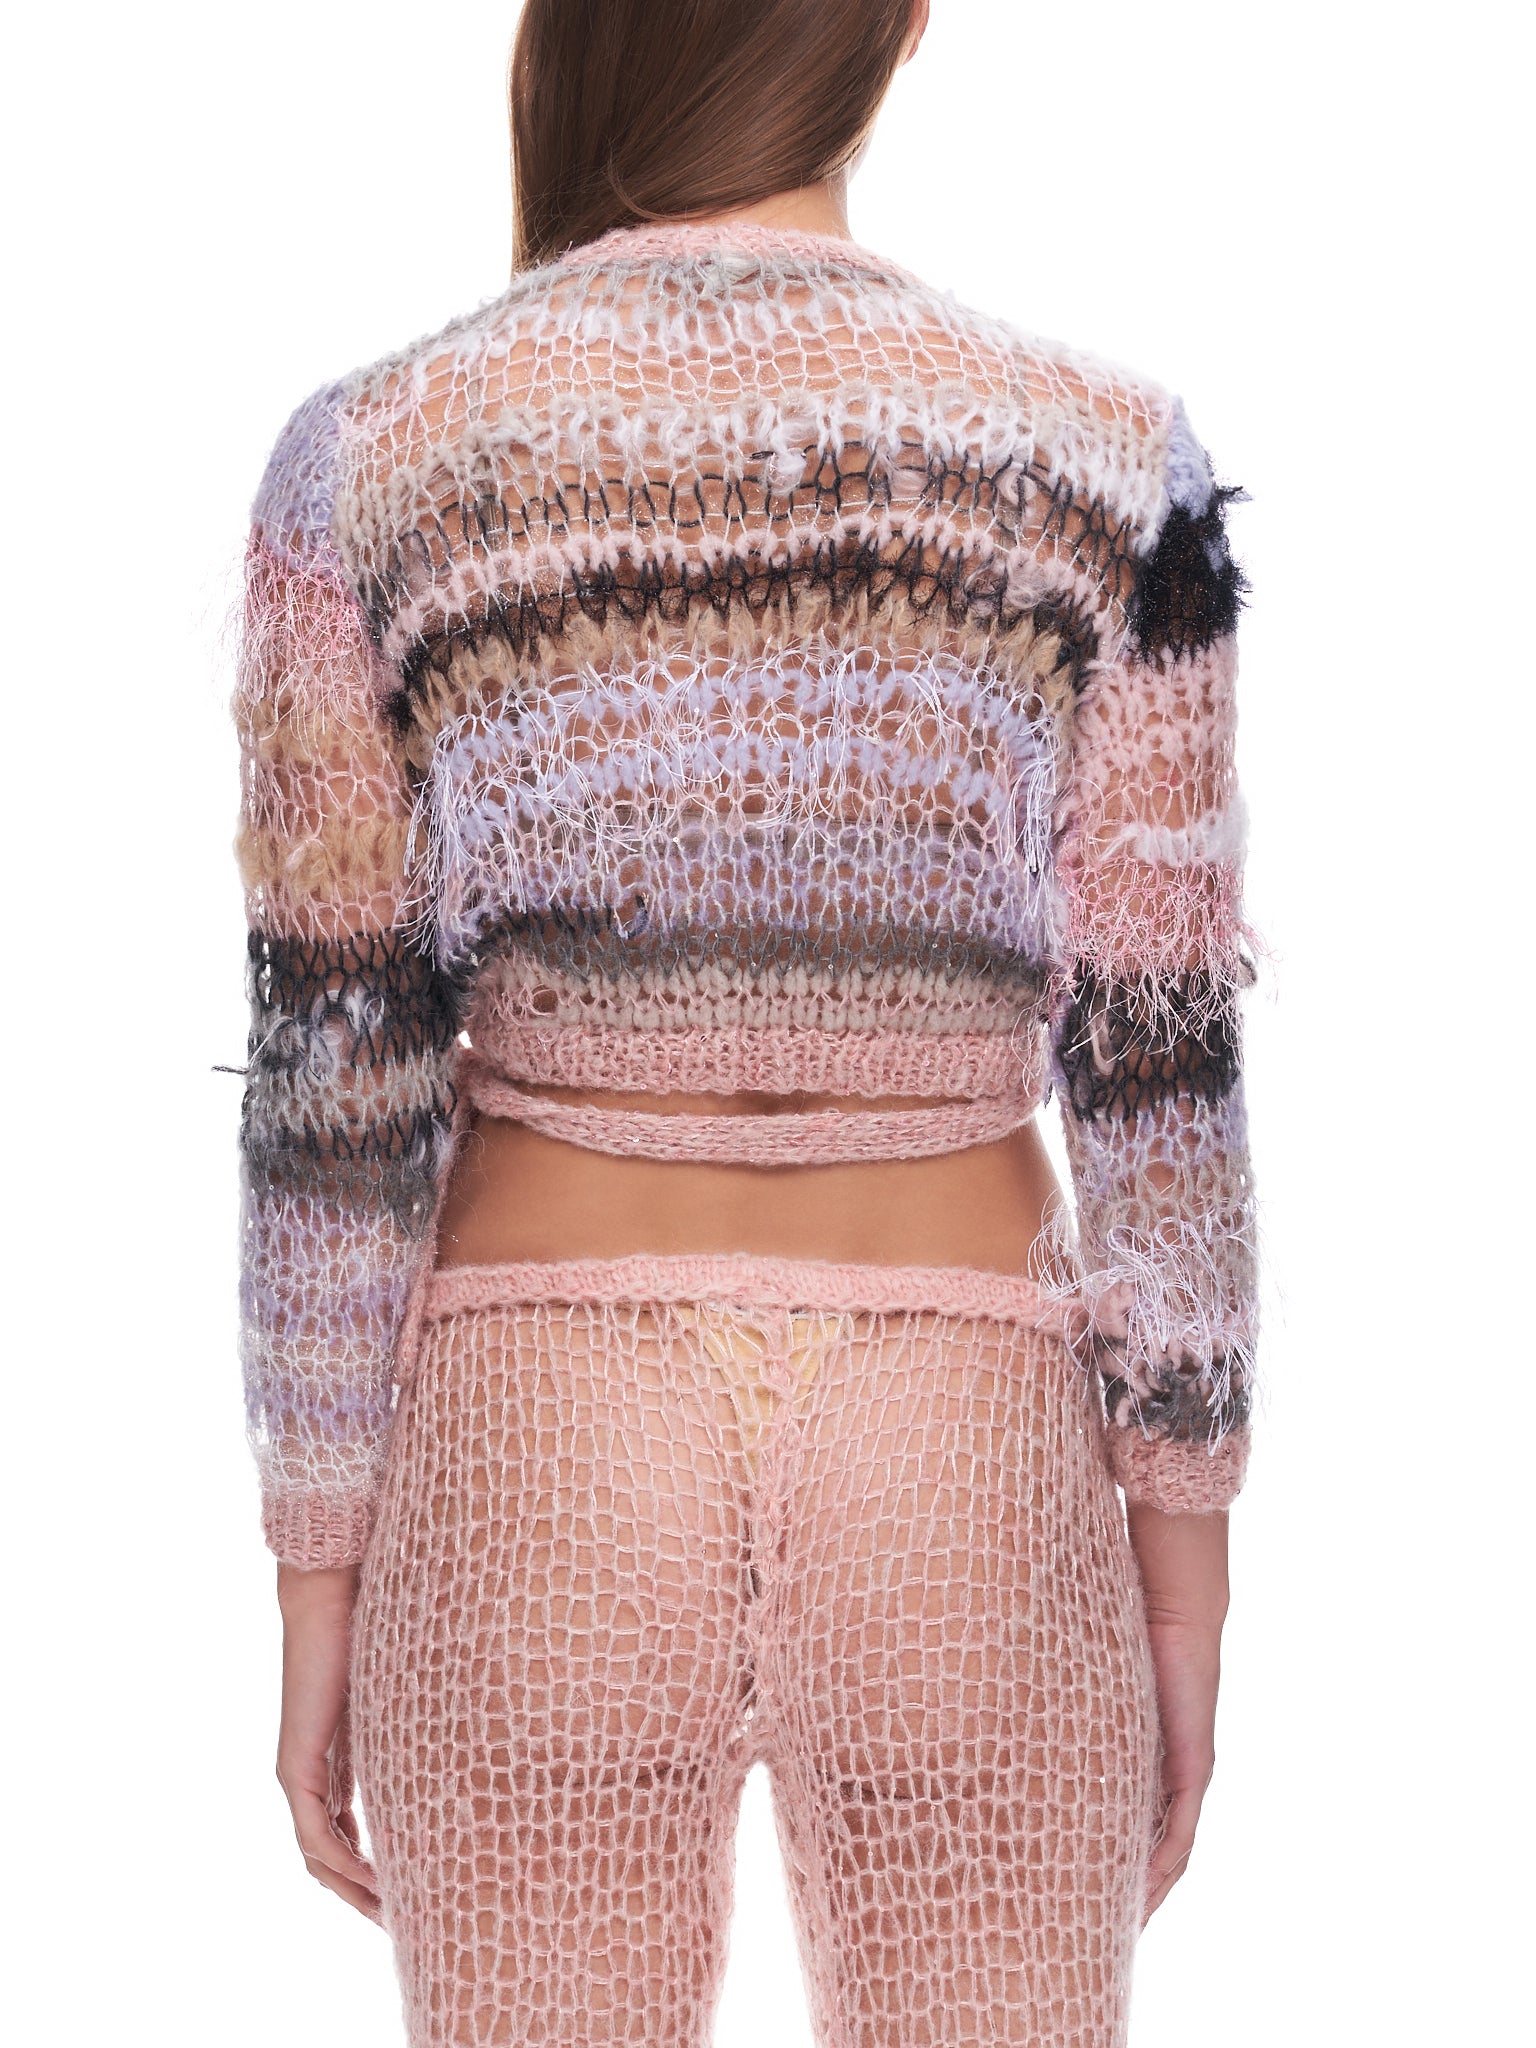 Mohair Knit Wrap Sweater (F2260-PINK-GREY)